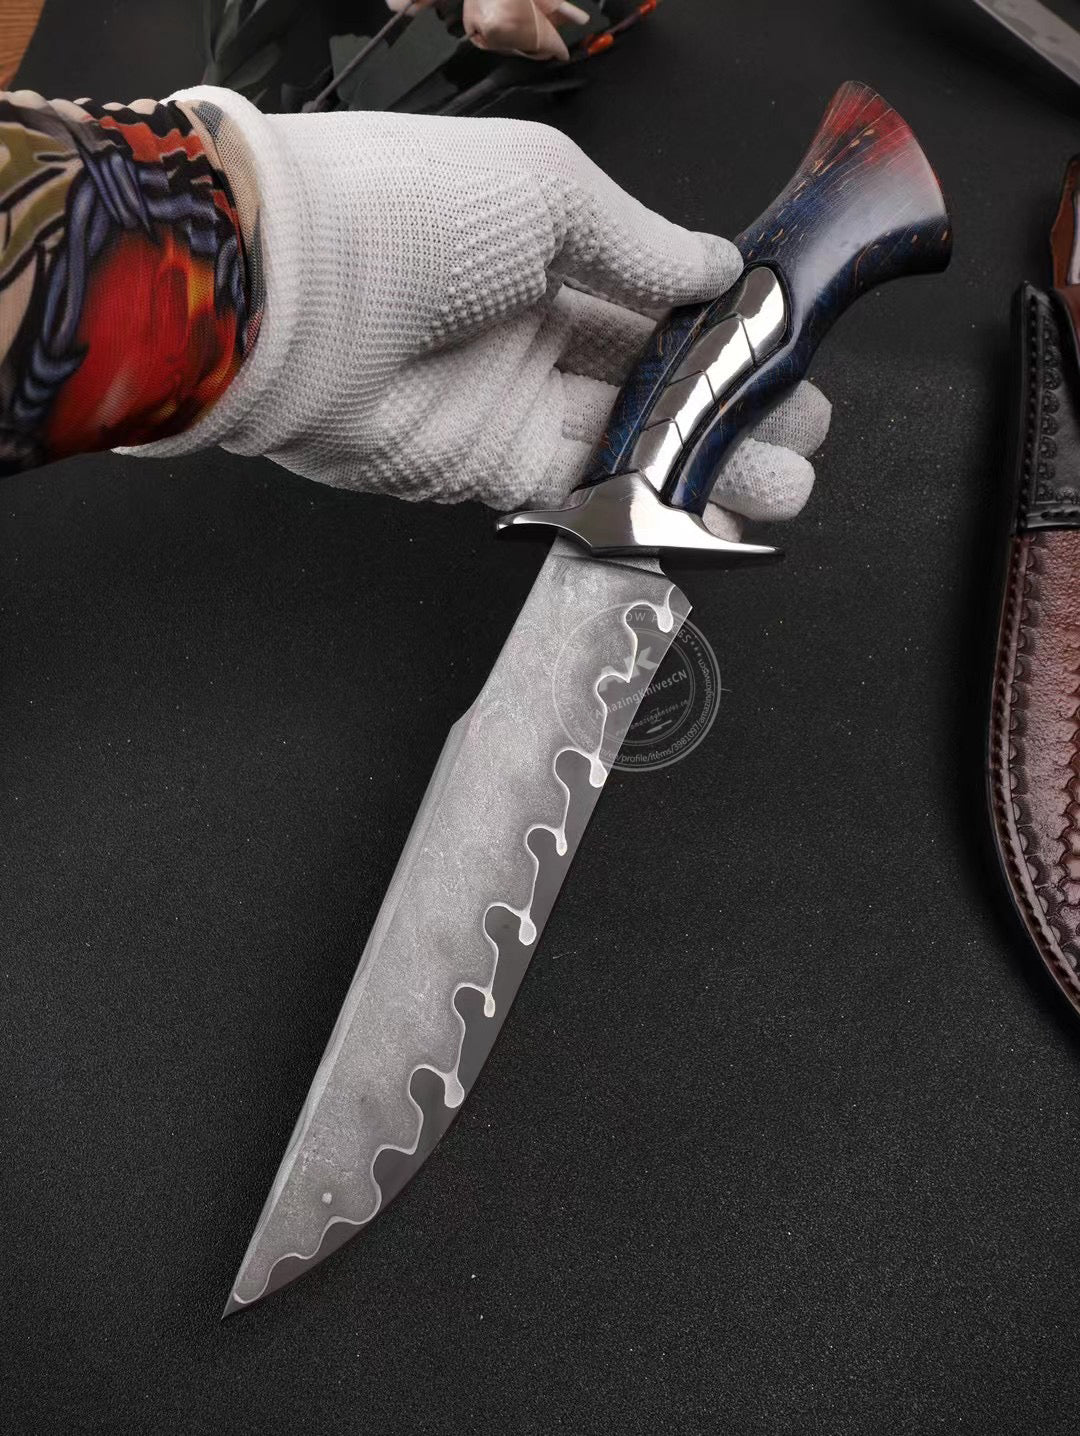 Hand Forged Damascus Steel Hunting Knife Bowie Survival Fixed Blade Full Tang- AK-HT0779